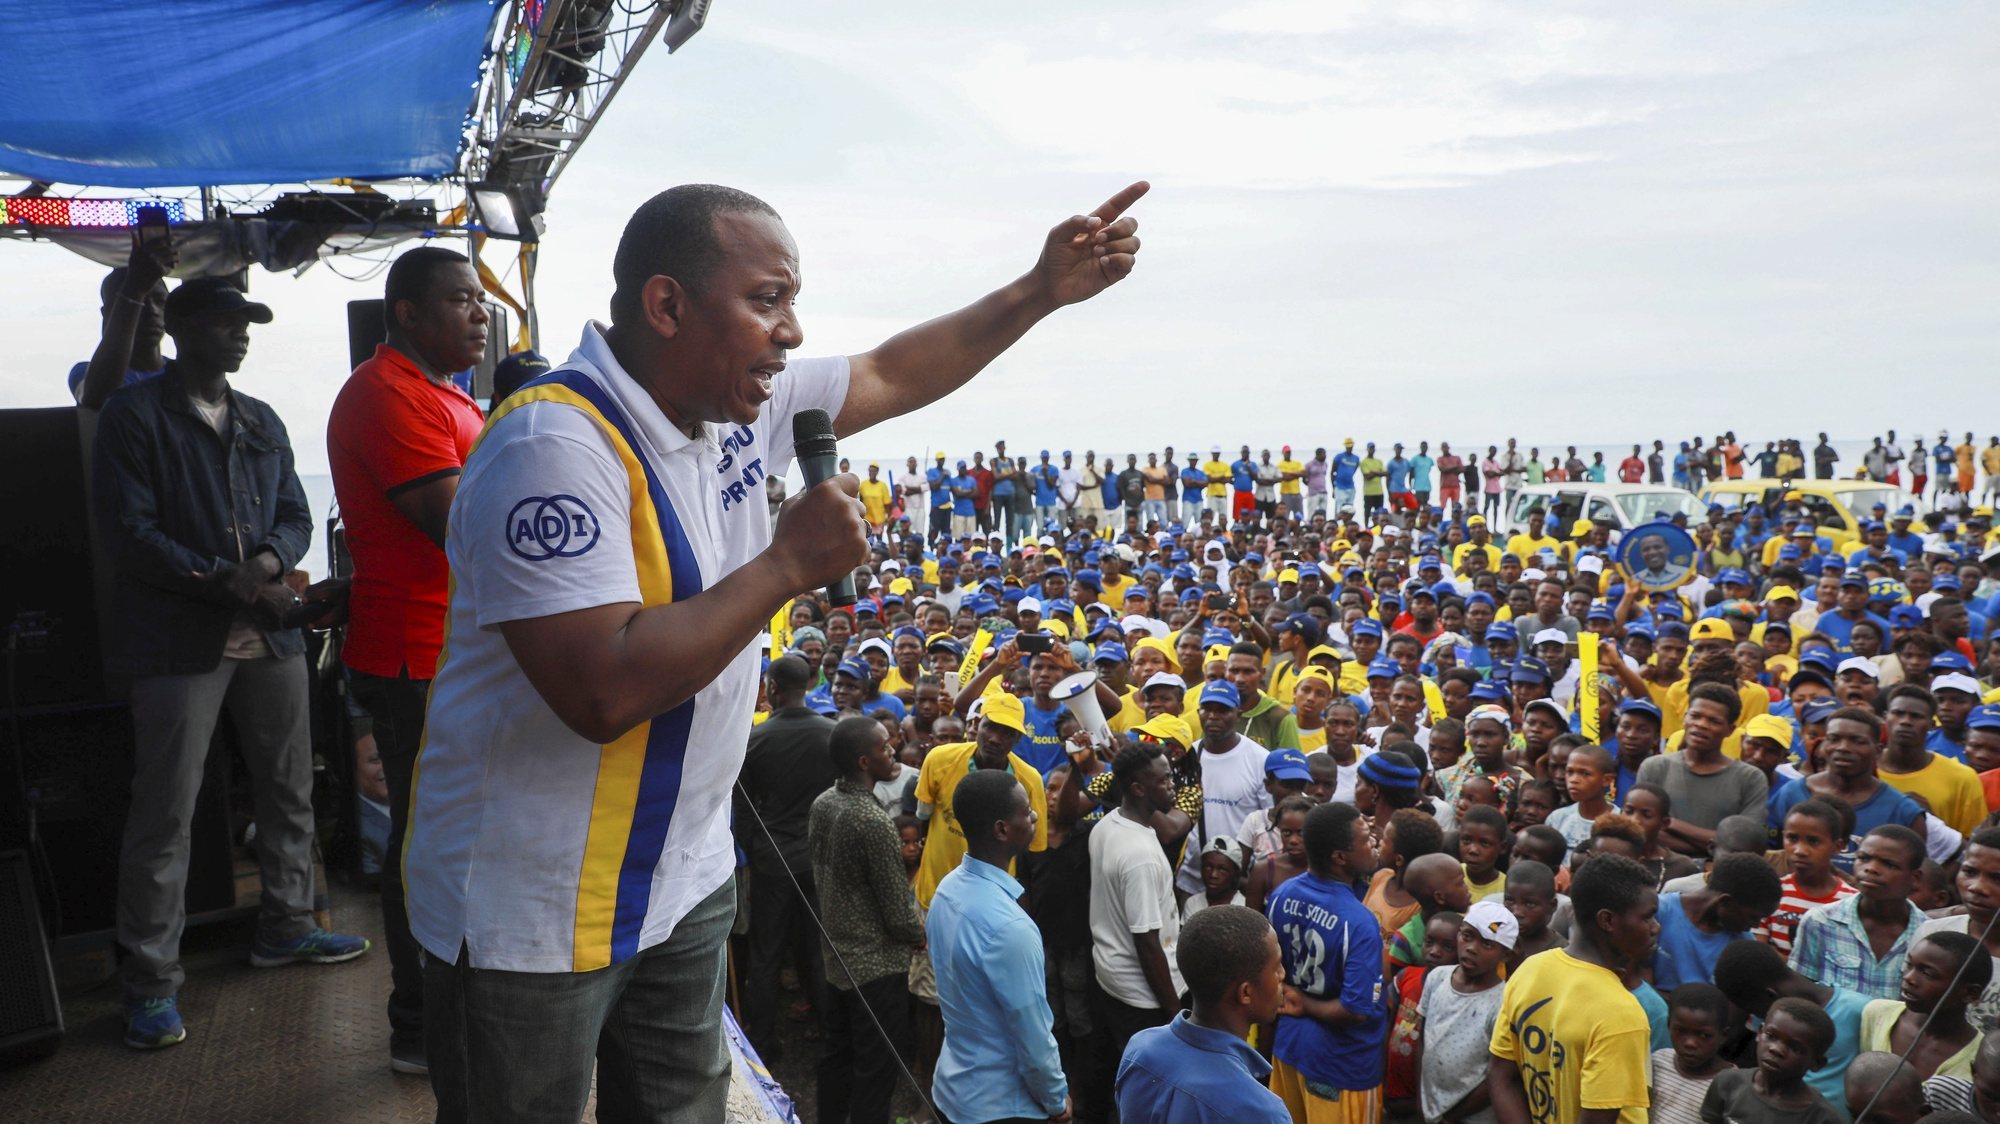 The former prime minister of Sao Tome and Principe, Patrice Trovoada (R) leader of the main opposition party (ADI) during a rally in Santa Catarina to the electoral campaign for the legislative elections 22 September 2022. Sao Tome and Principe goes to the polls for the legislative elections on the 25th September 2022. ESTELA SILVA/LUSA